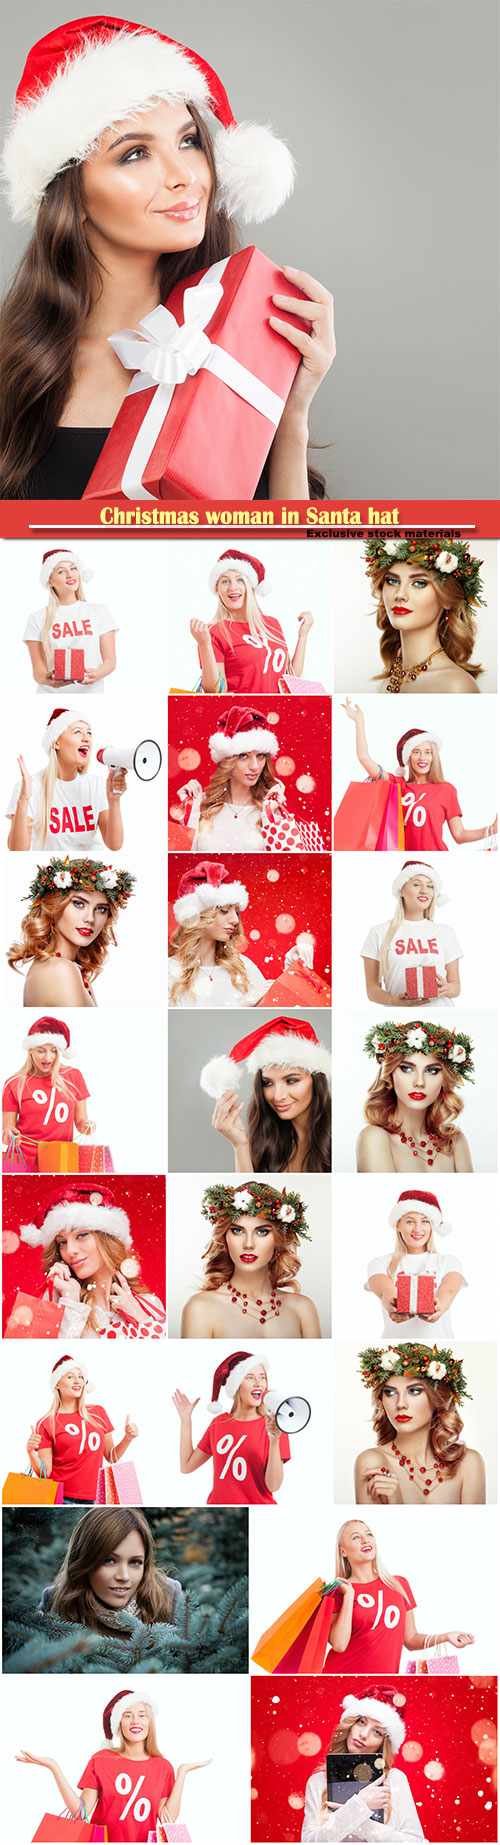 Christmas woman in Santa hat, woman with Christmas wreath